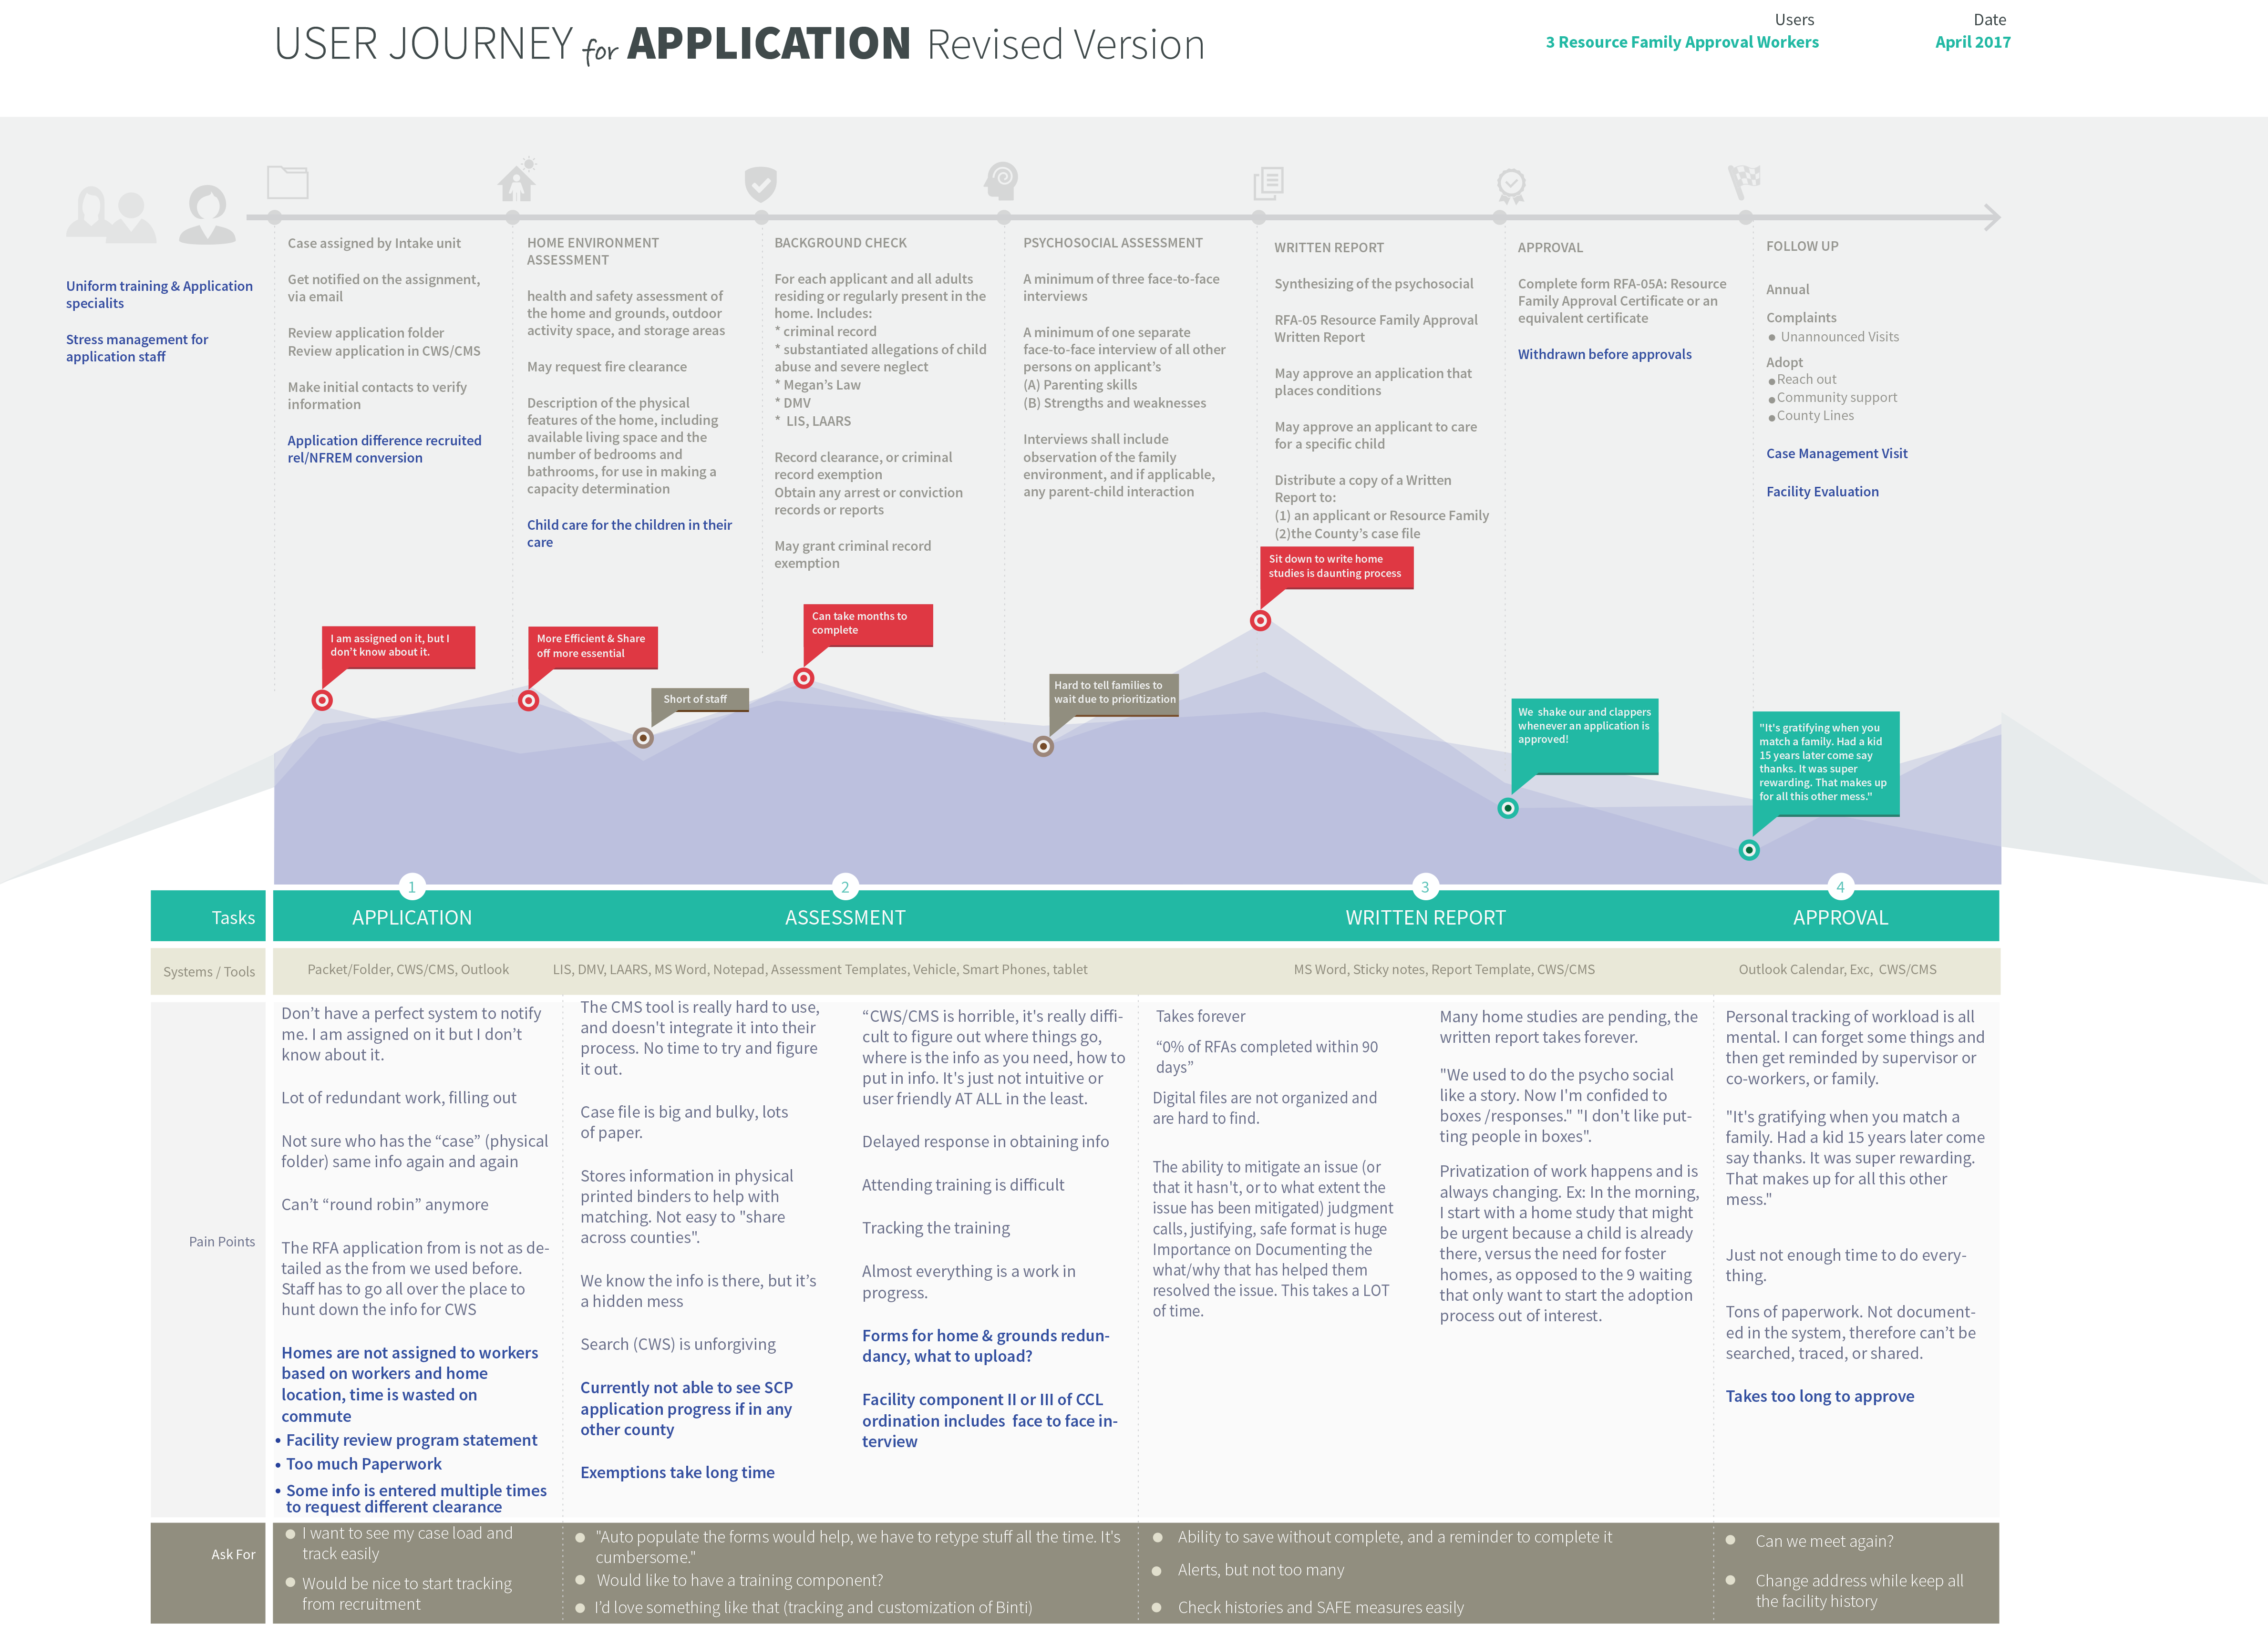 User Journey Map for RFA Application, by Liz Lin